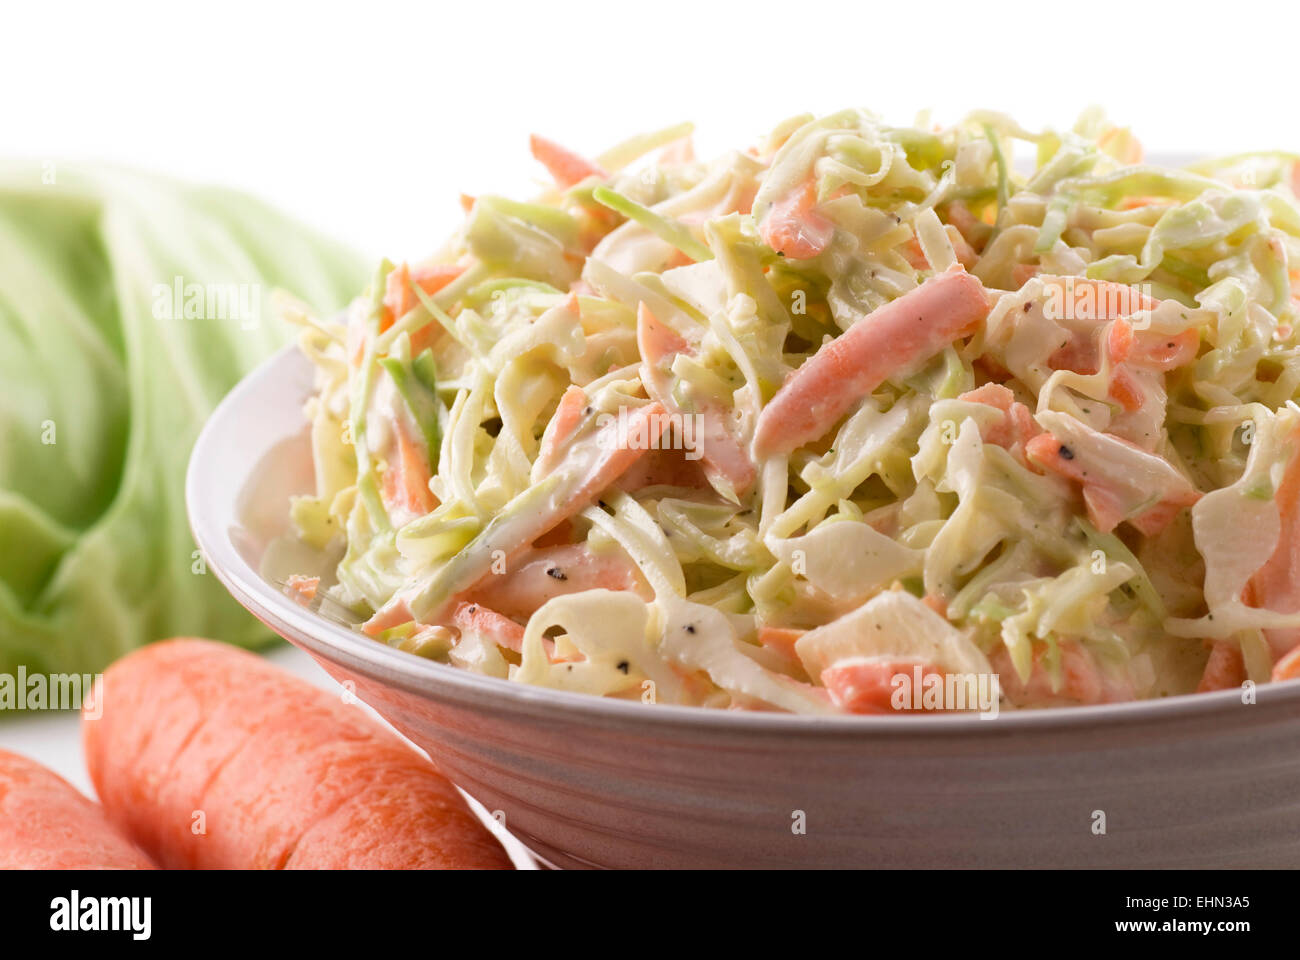 Coleslaw with carrot and white cabbage in a bowl. Stock Photo